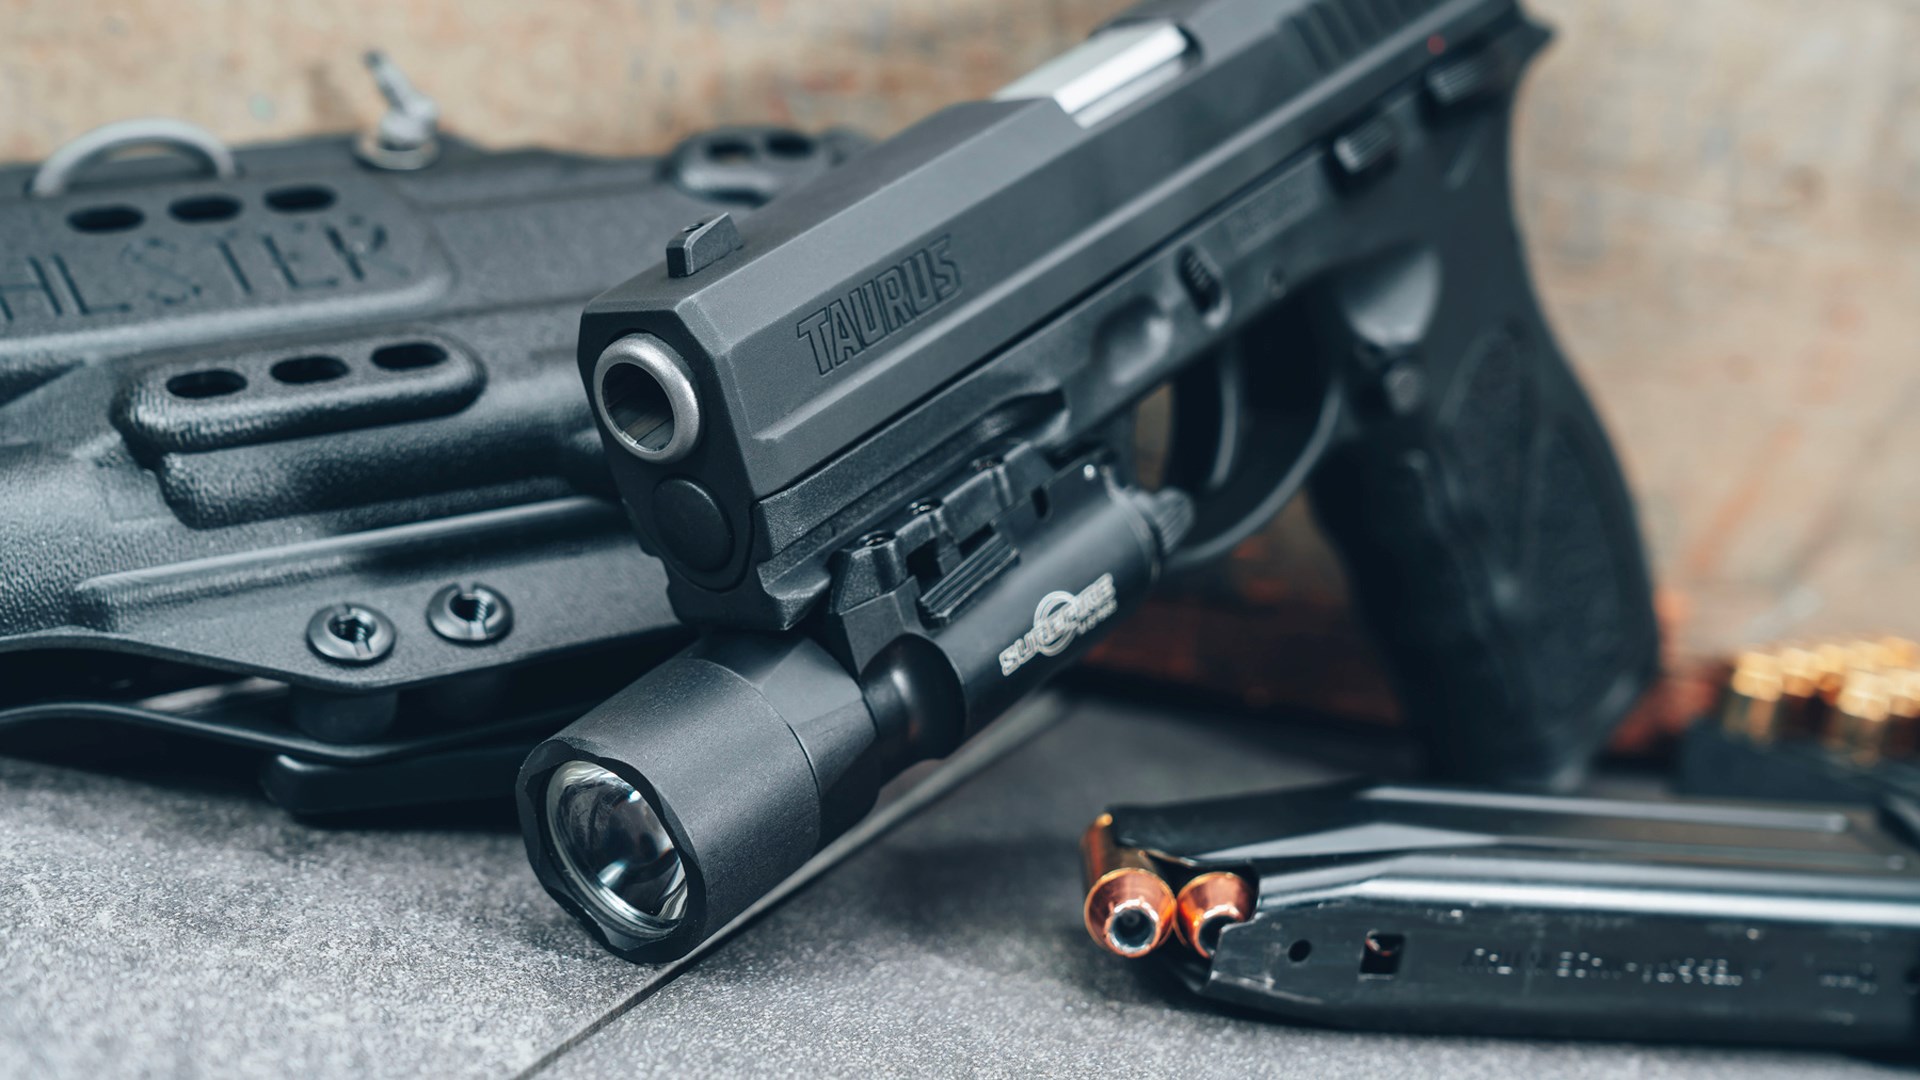 Taurus TH10 shown with a SureFire weaponlight mounted to its accessory rail.